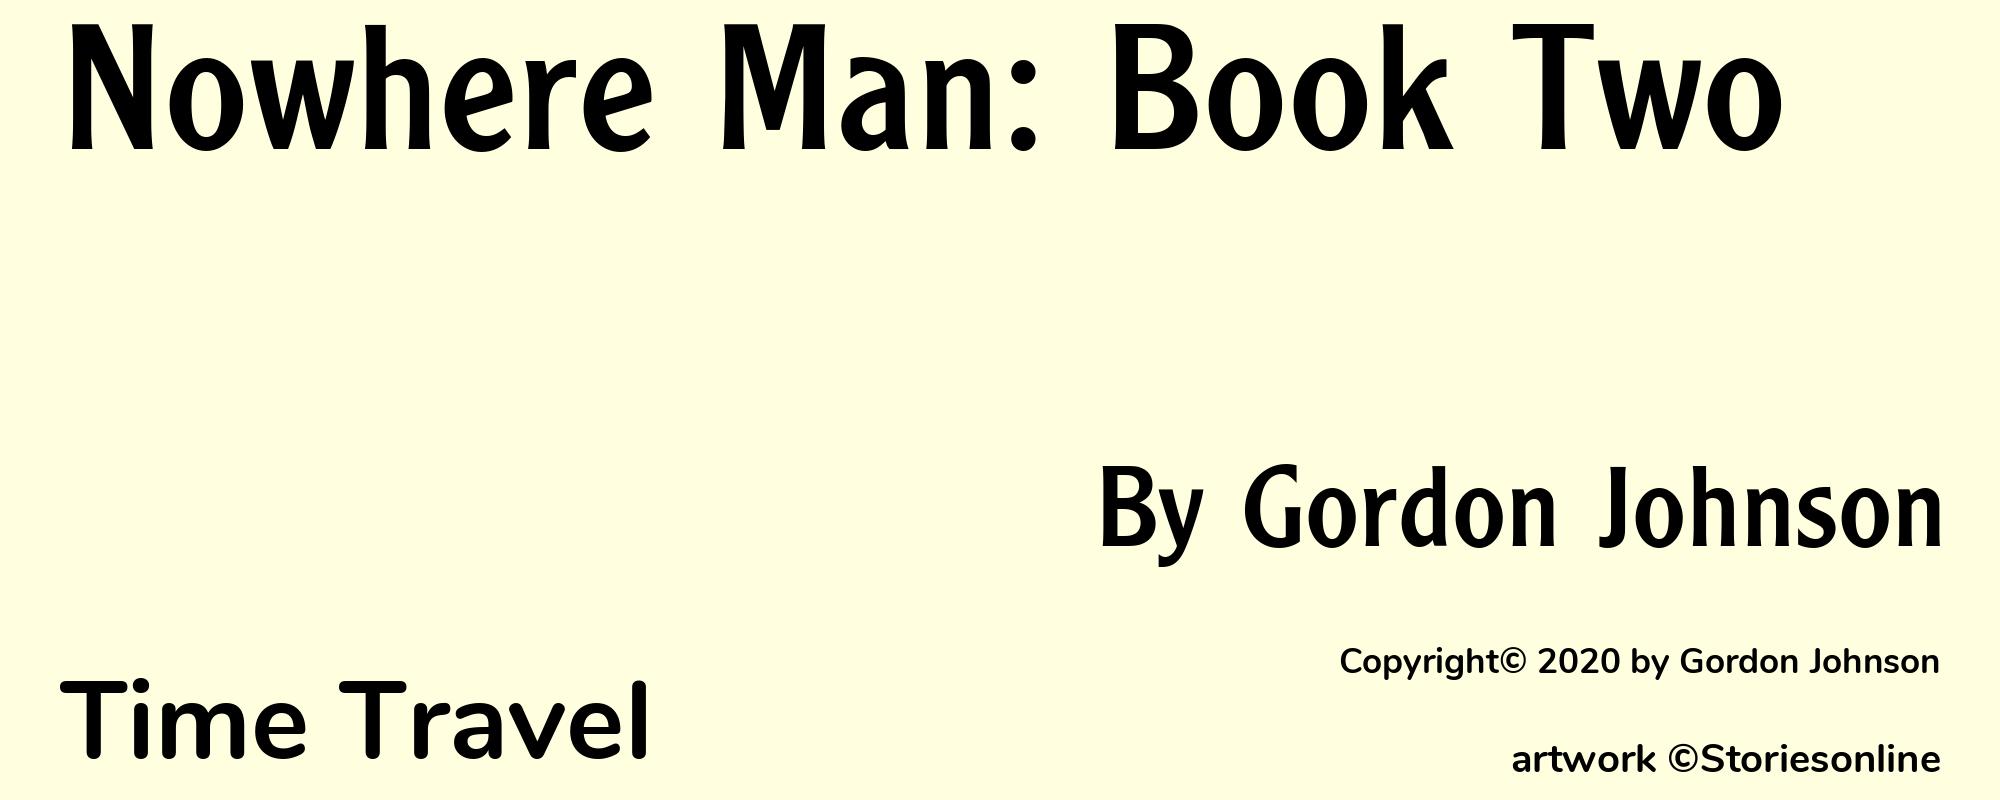 Nowhere Man: Book Two - Cover